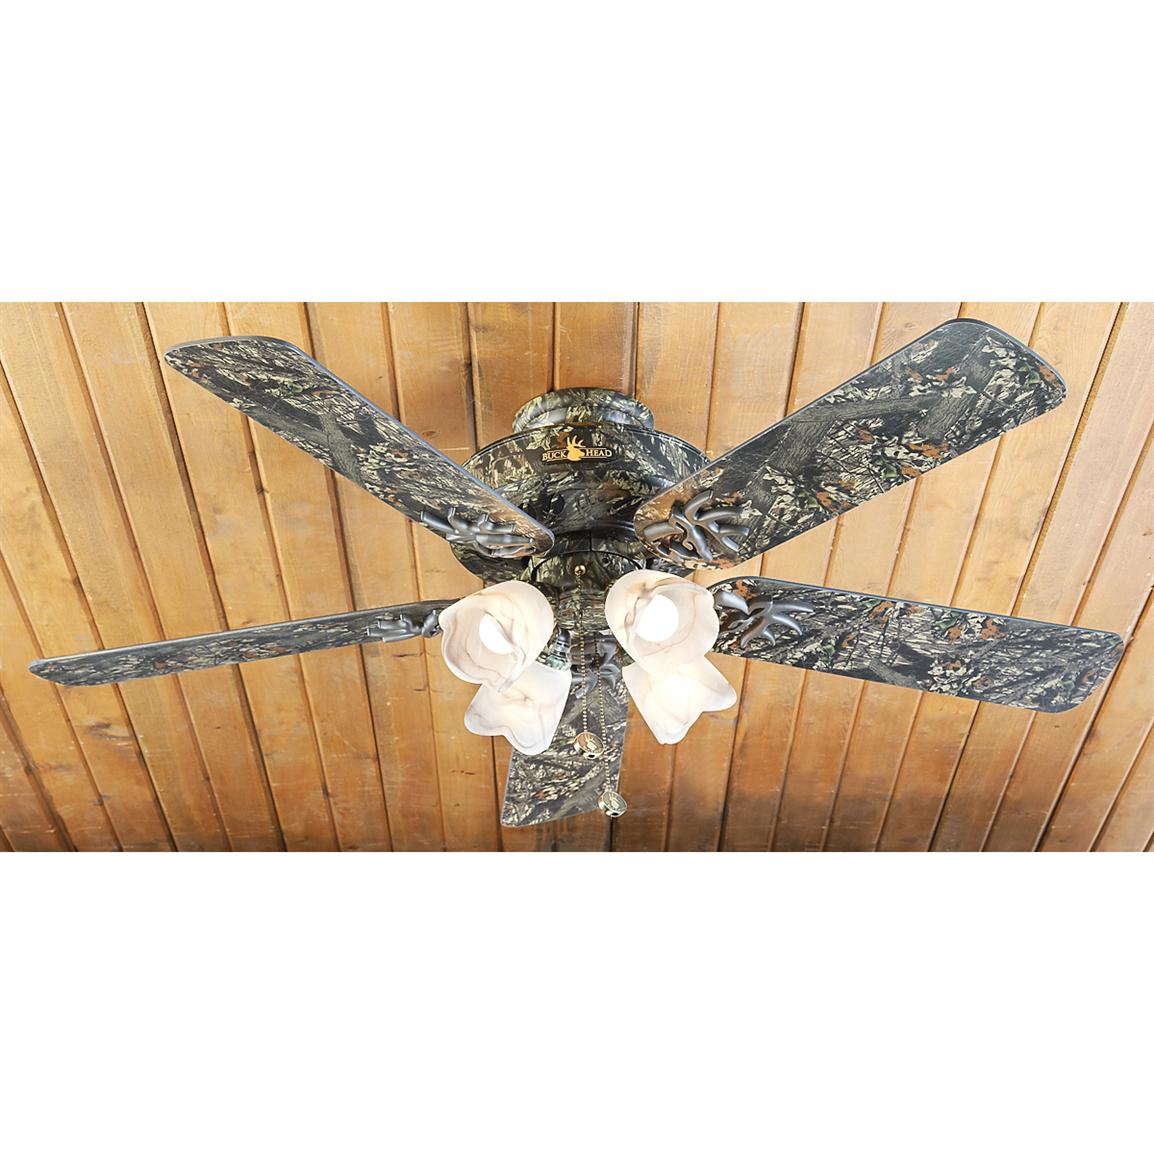 52 Buckhead Ceiling Fan Camo, Camouflage Ceiling Fans With Lights